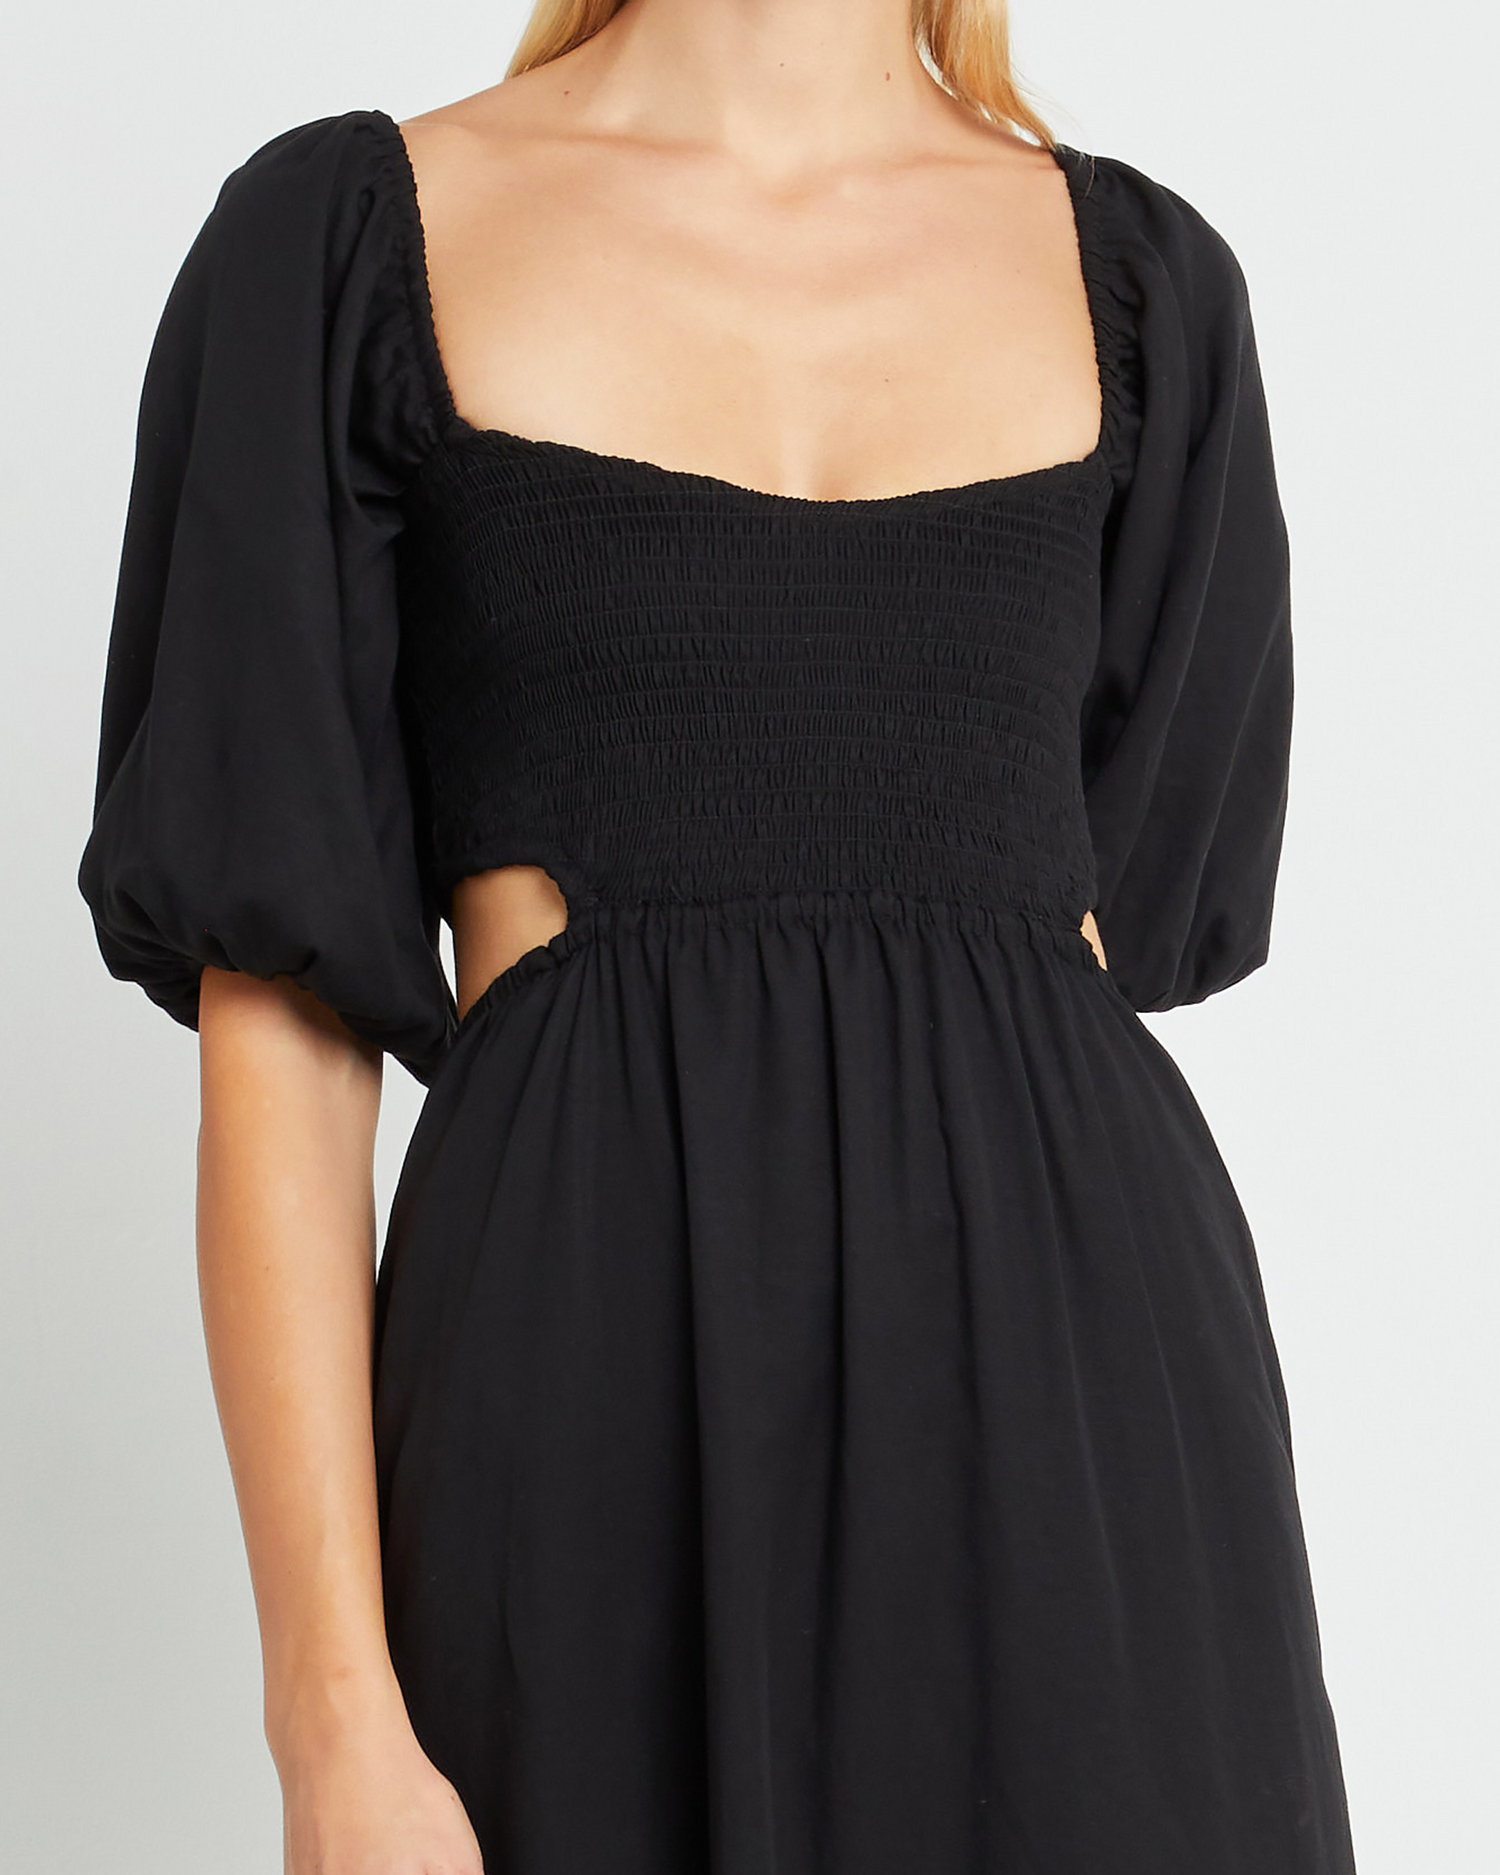 Fifth image of Leighton Dress, a black maxi dress, open back, short sleeve, puff sleeve, pocket, cut out